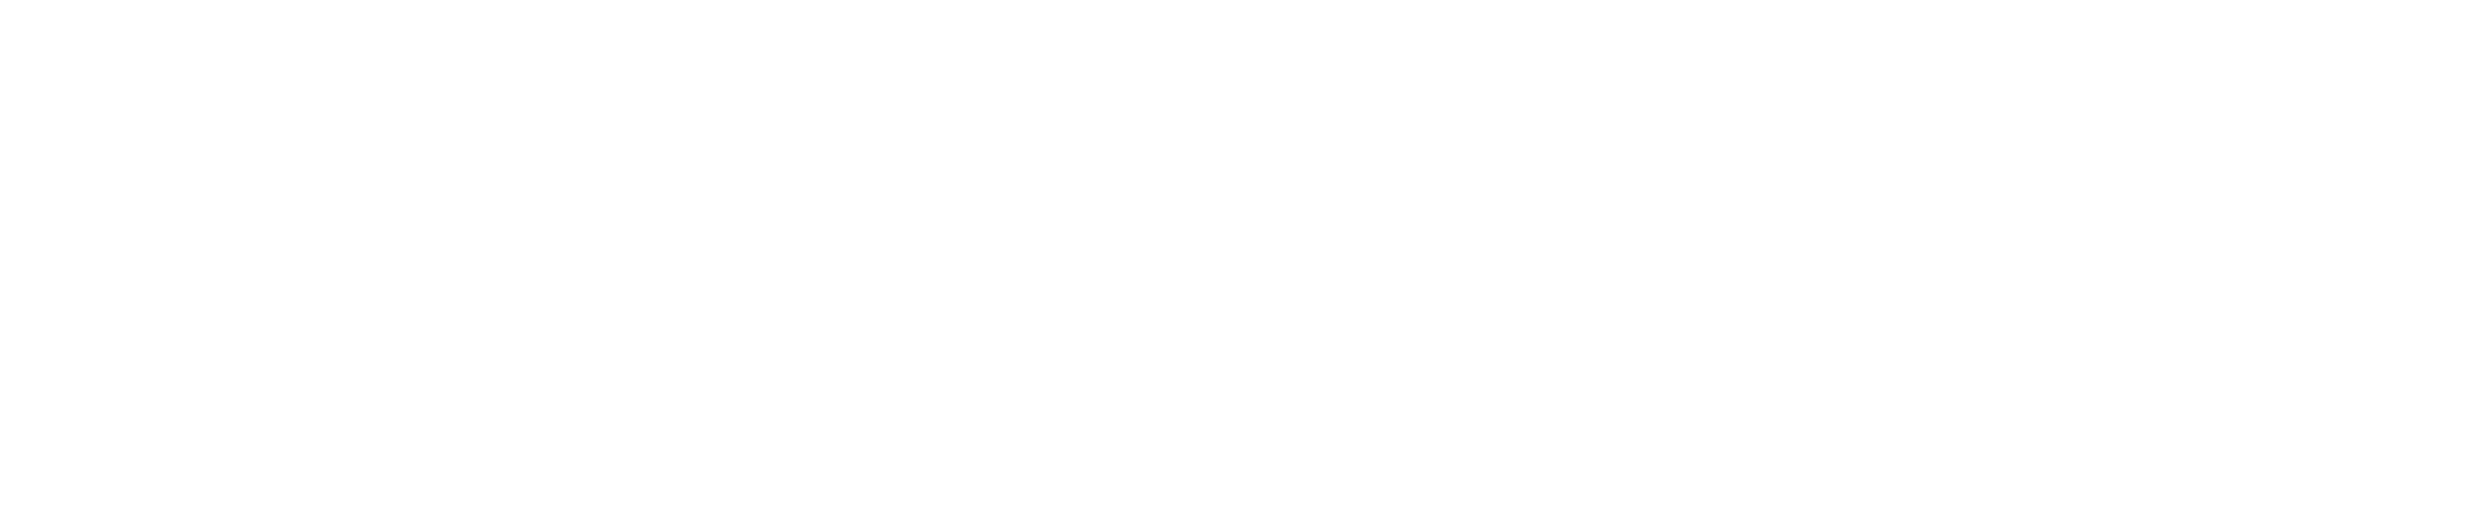 Faith & Reason Lectures heading in white copy-1